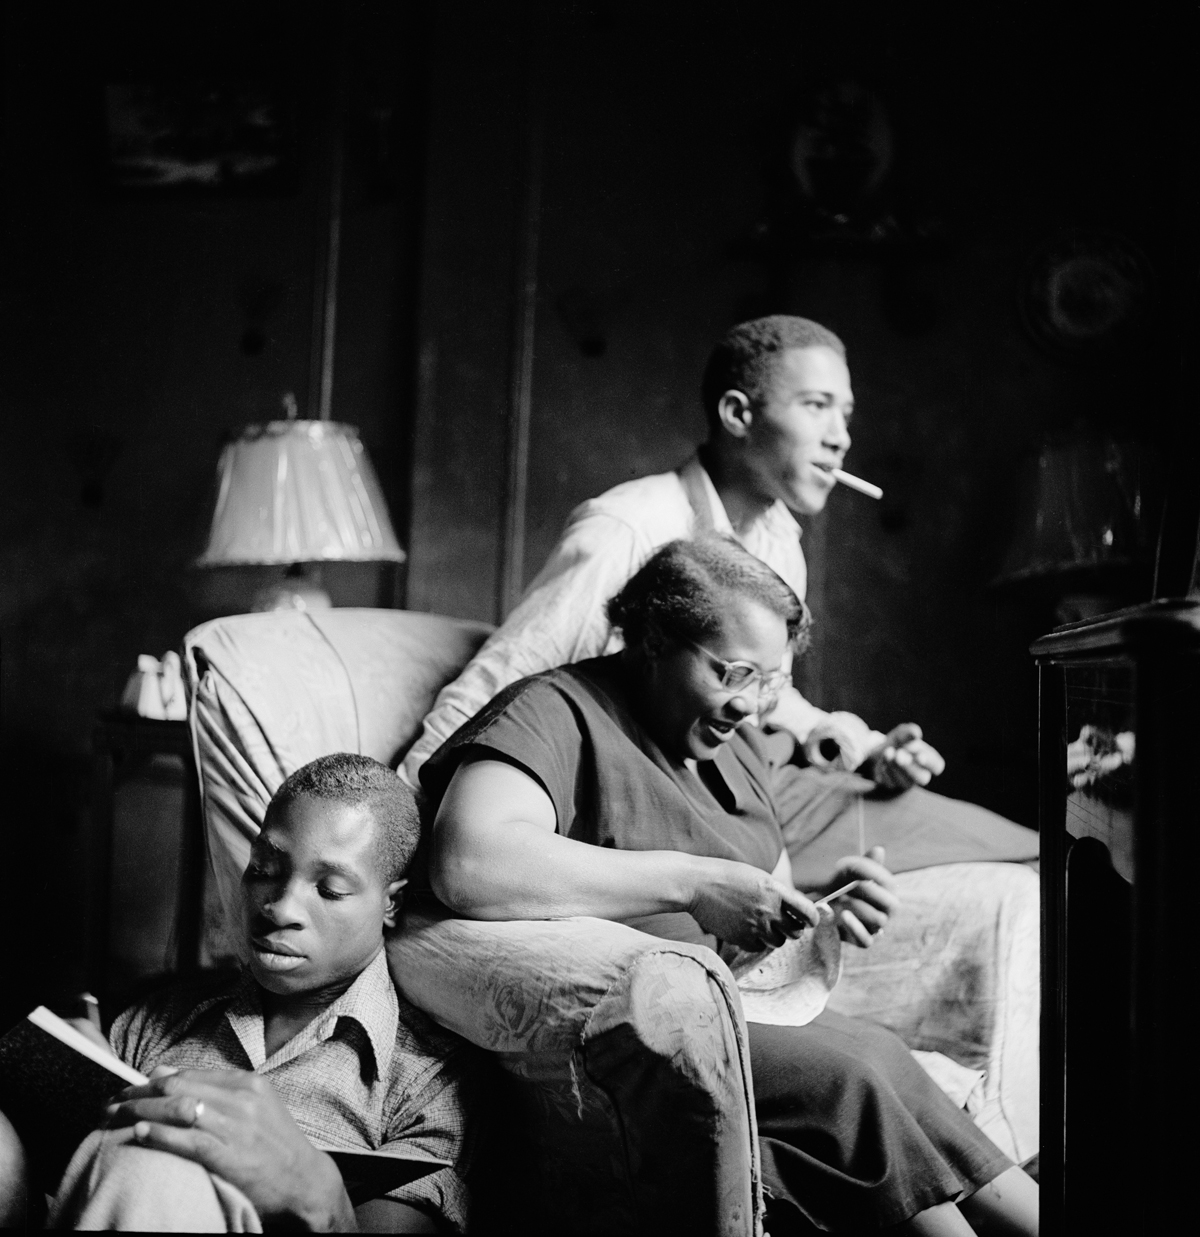 Gordon Parks, 'Red Jackson with His Mother and Brother, Harlem, New York,' 1948.